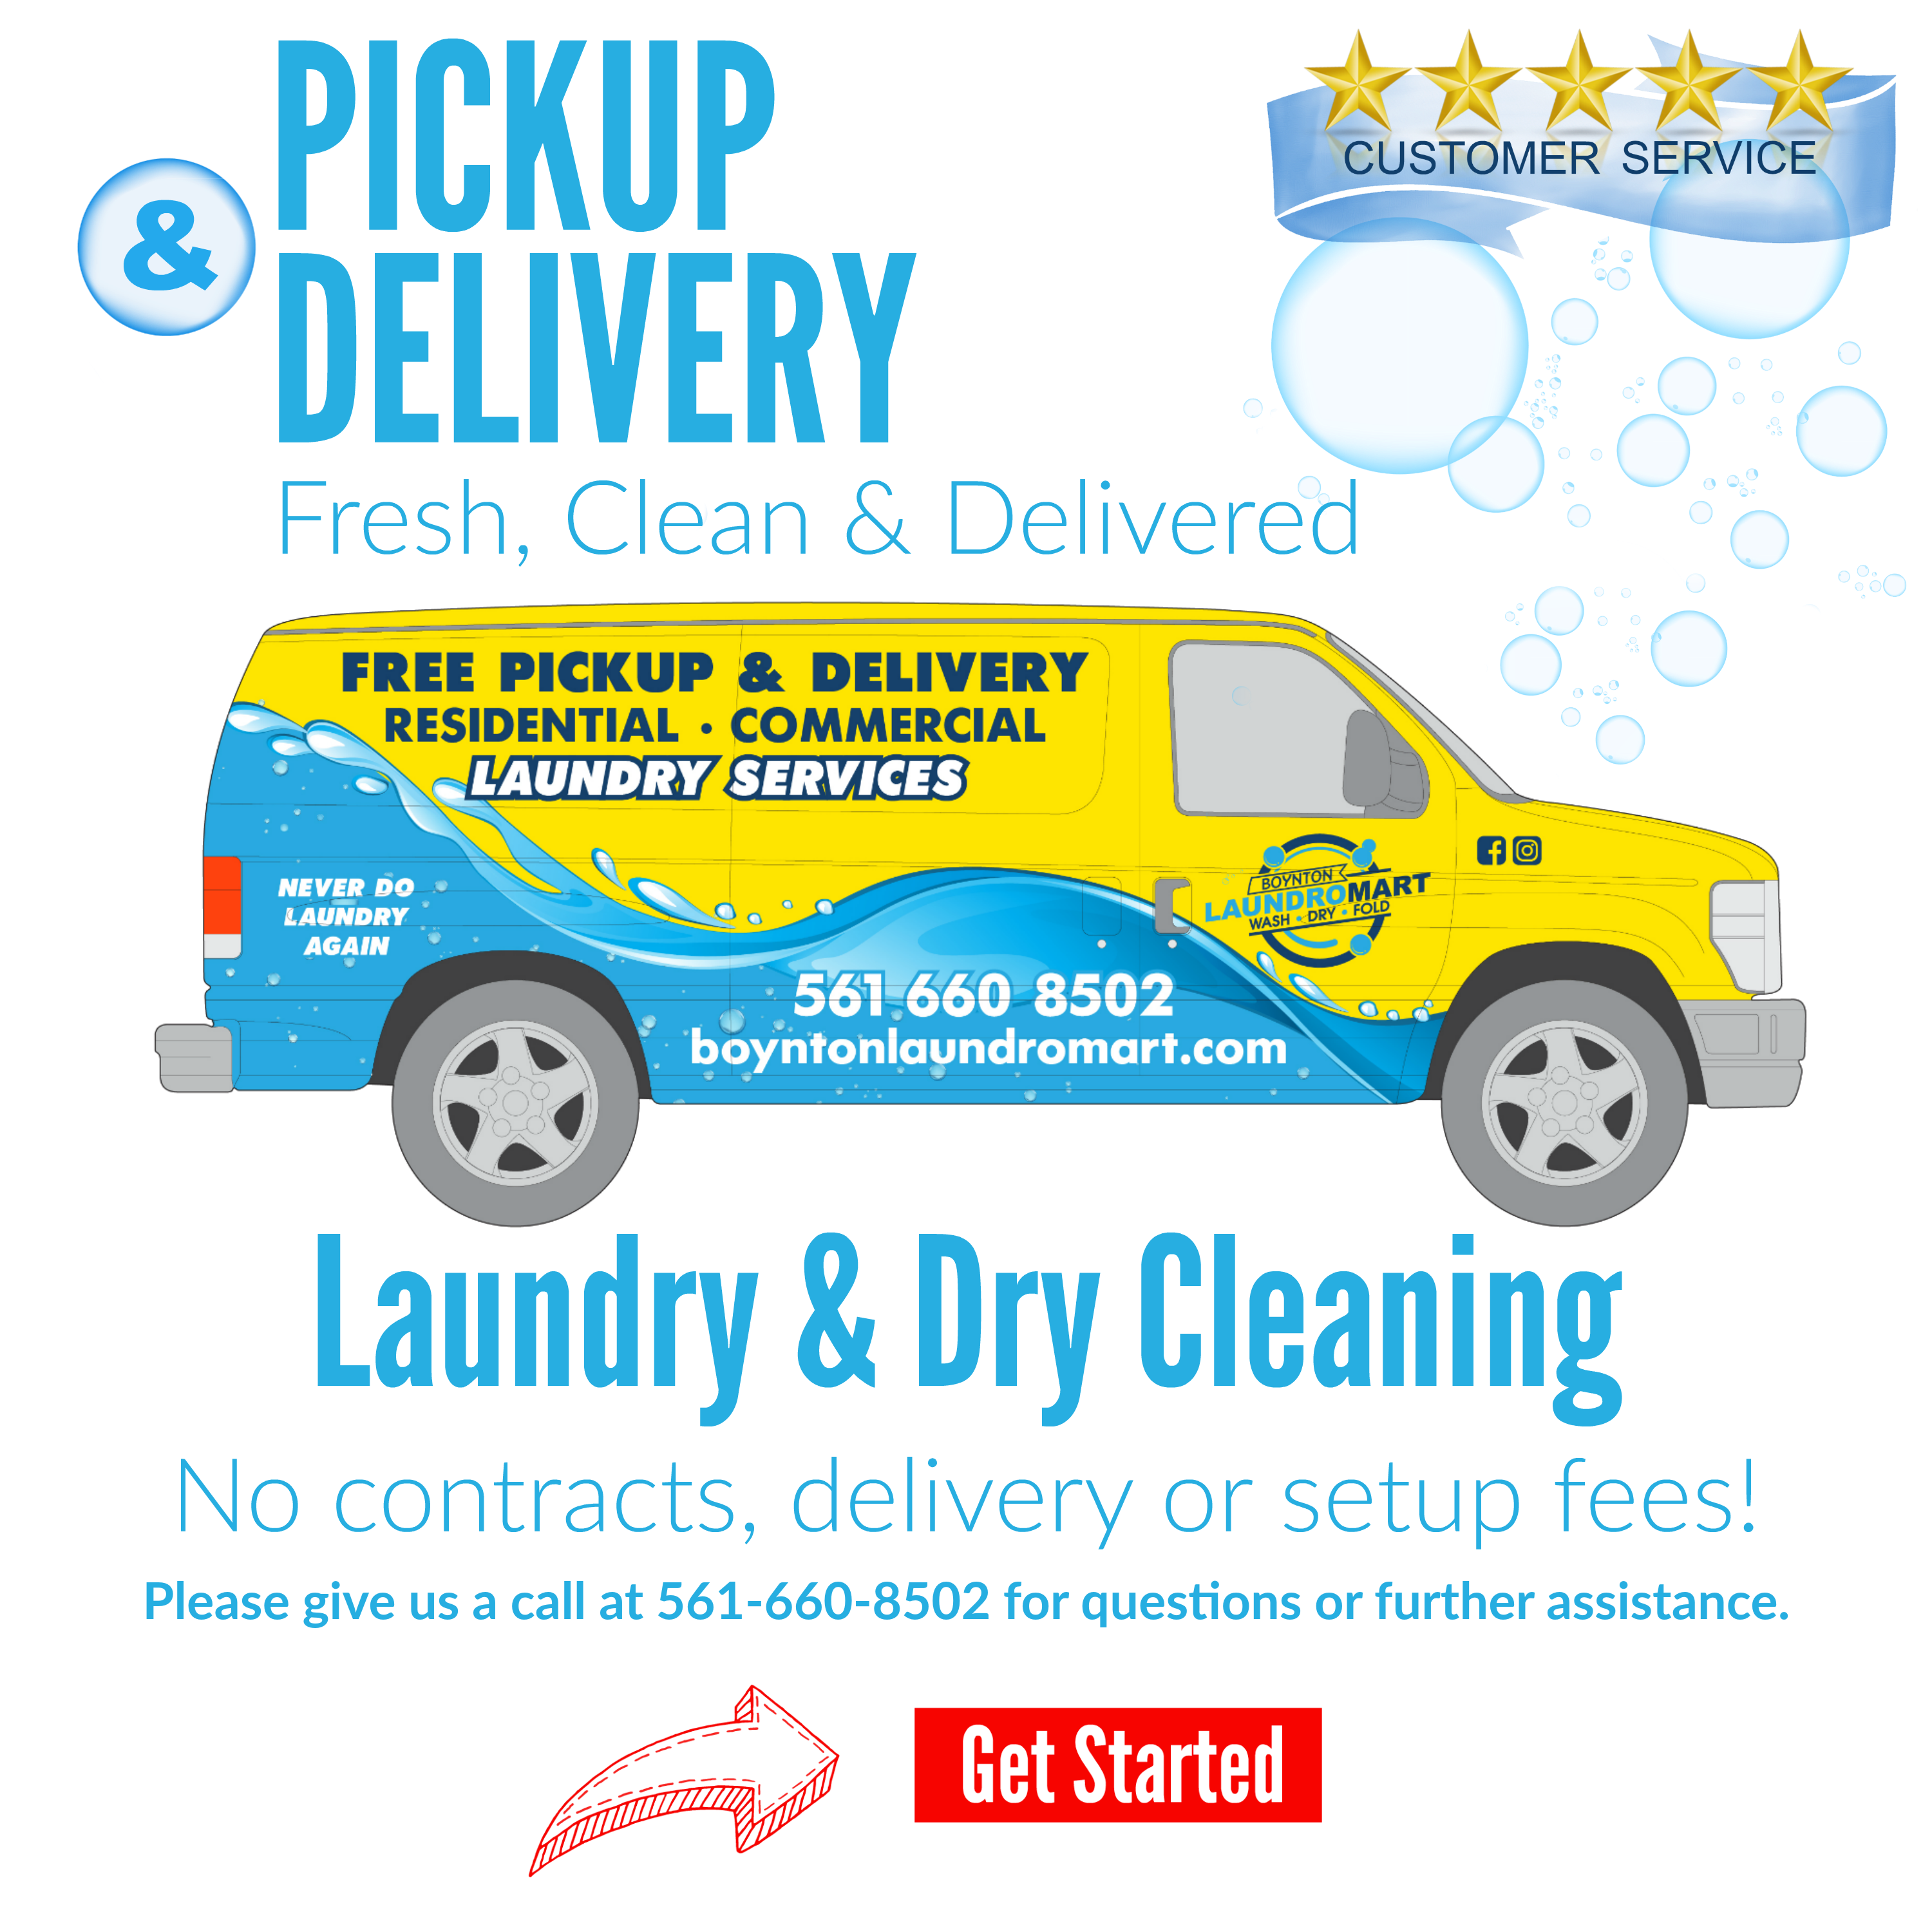 Pickup & Delivery Commercial Laundry Services Full Service Laundry